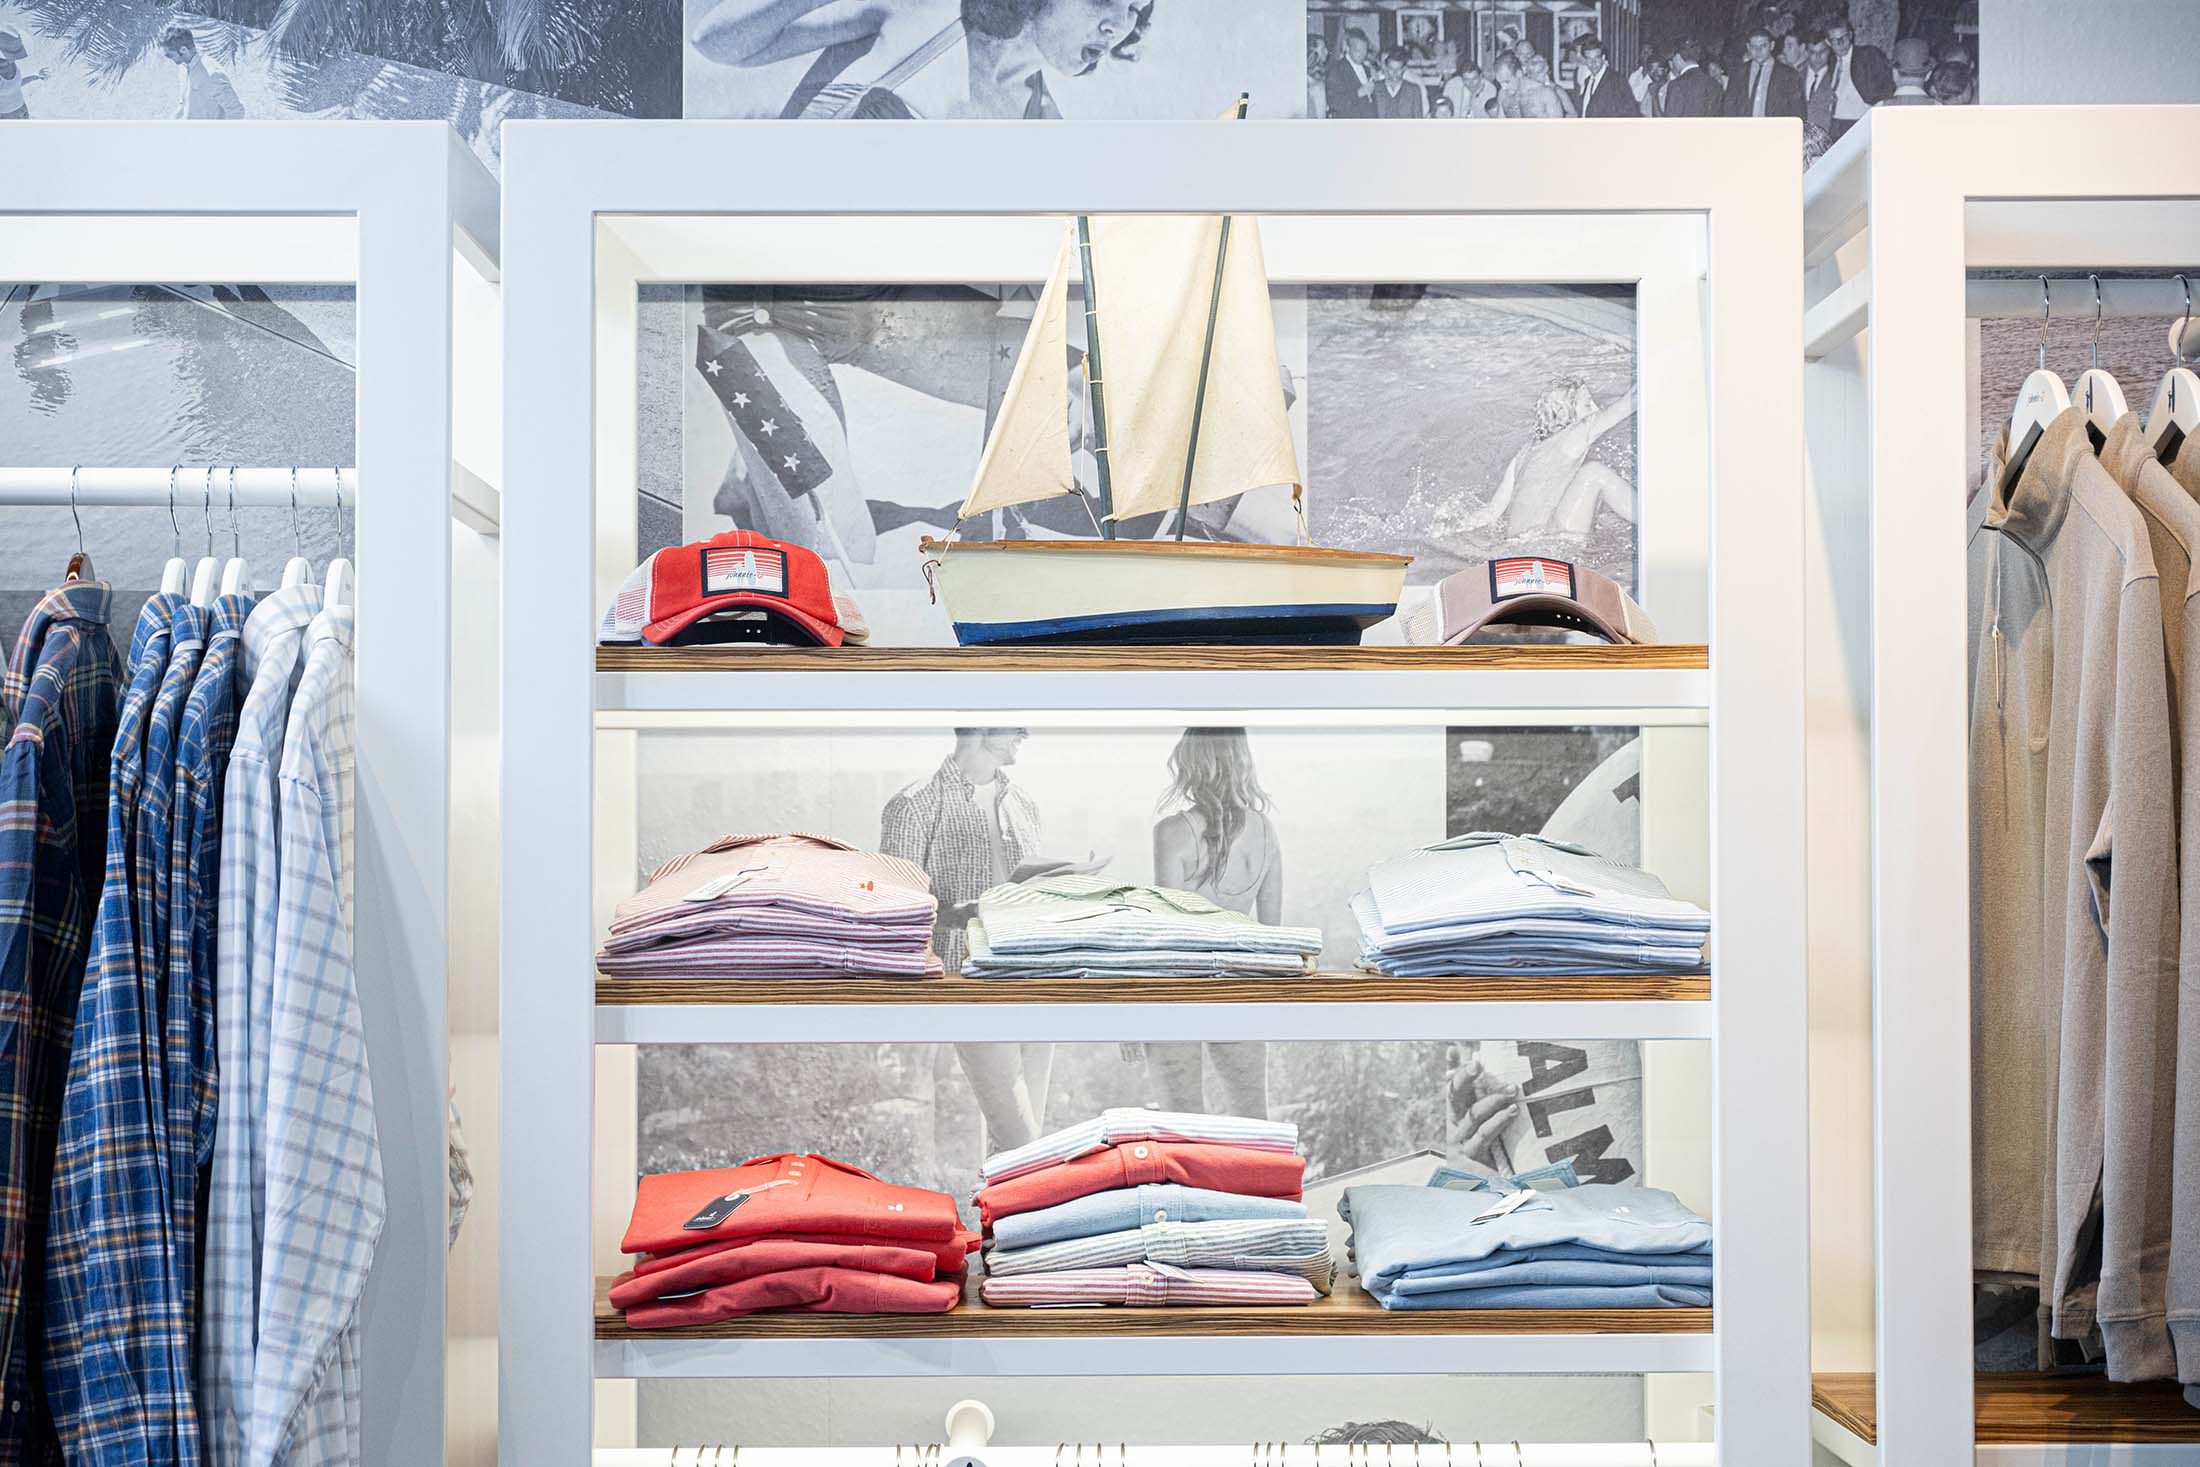 An in-store display with a model boat, hats, and shirts